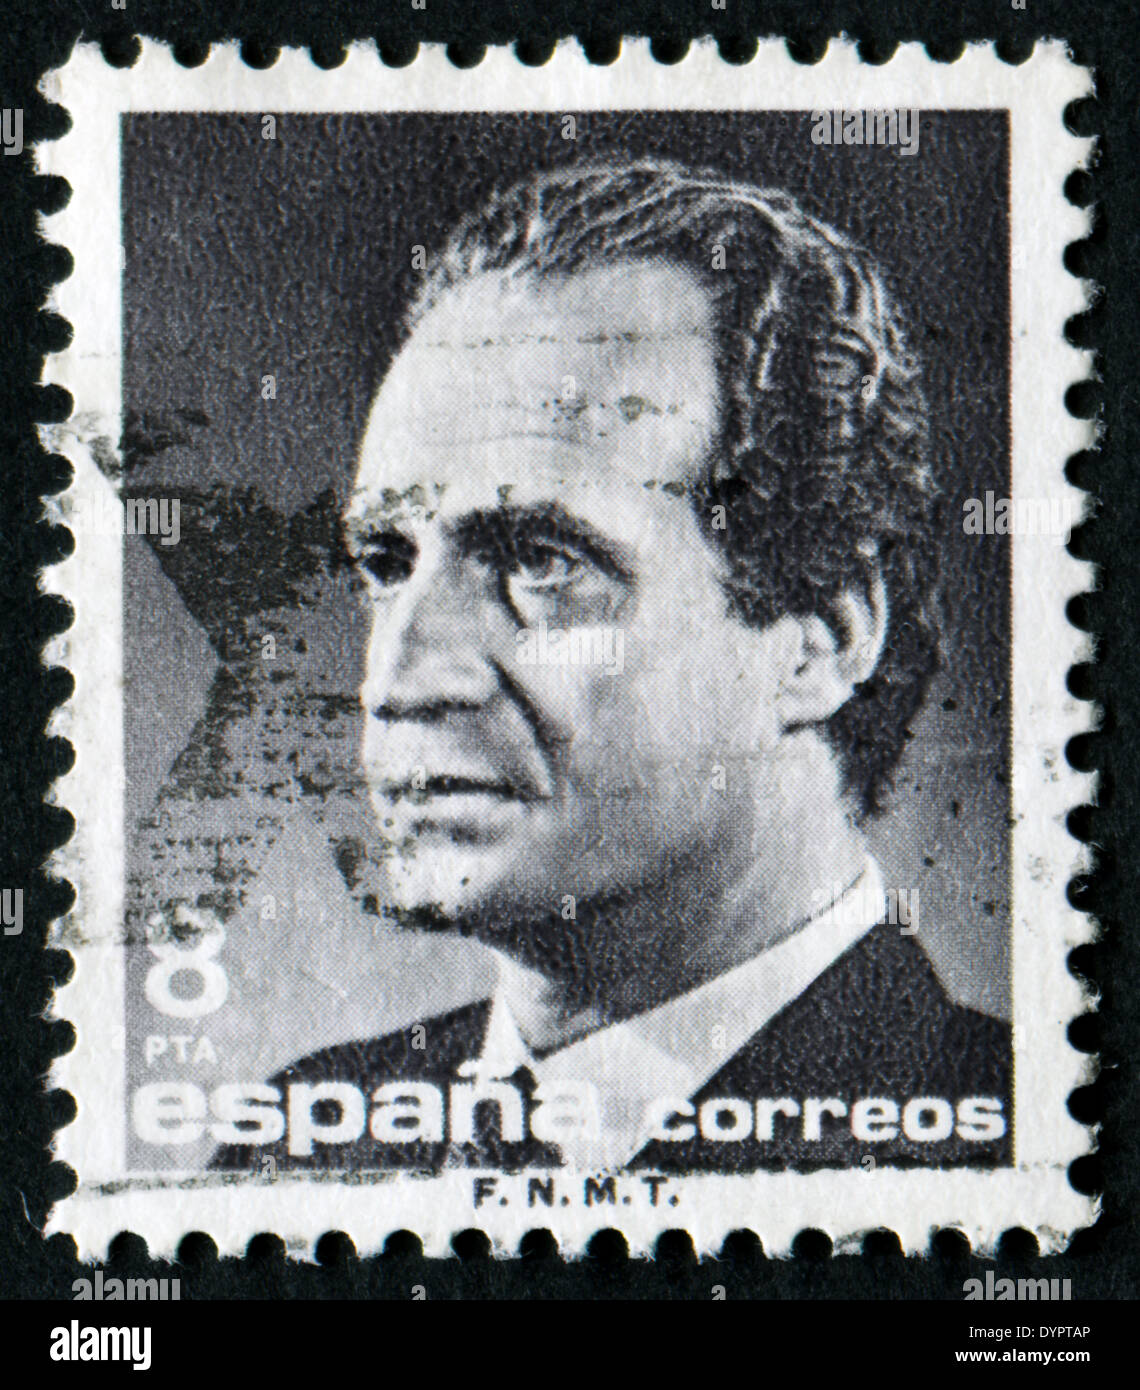 SPAIN - CIRCA 1985: A stamp printed in Spain shows a portrait of King Juan Carlos I of Spain without inscription Stock Photo